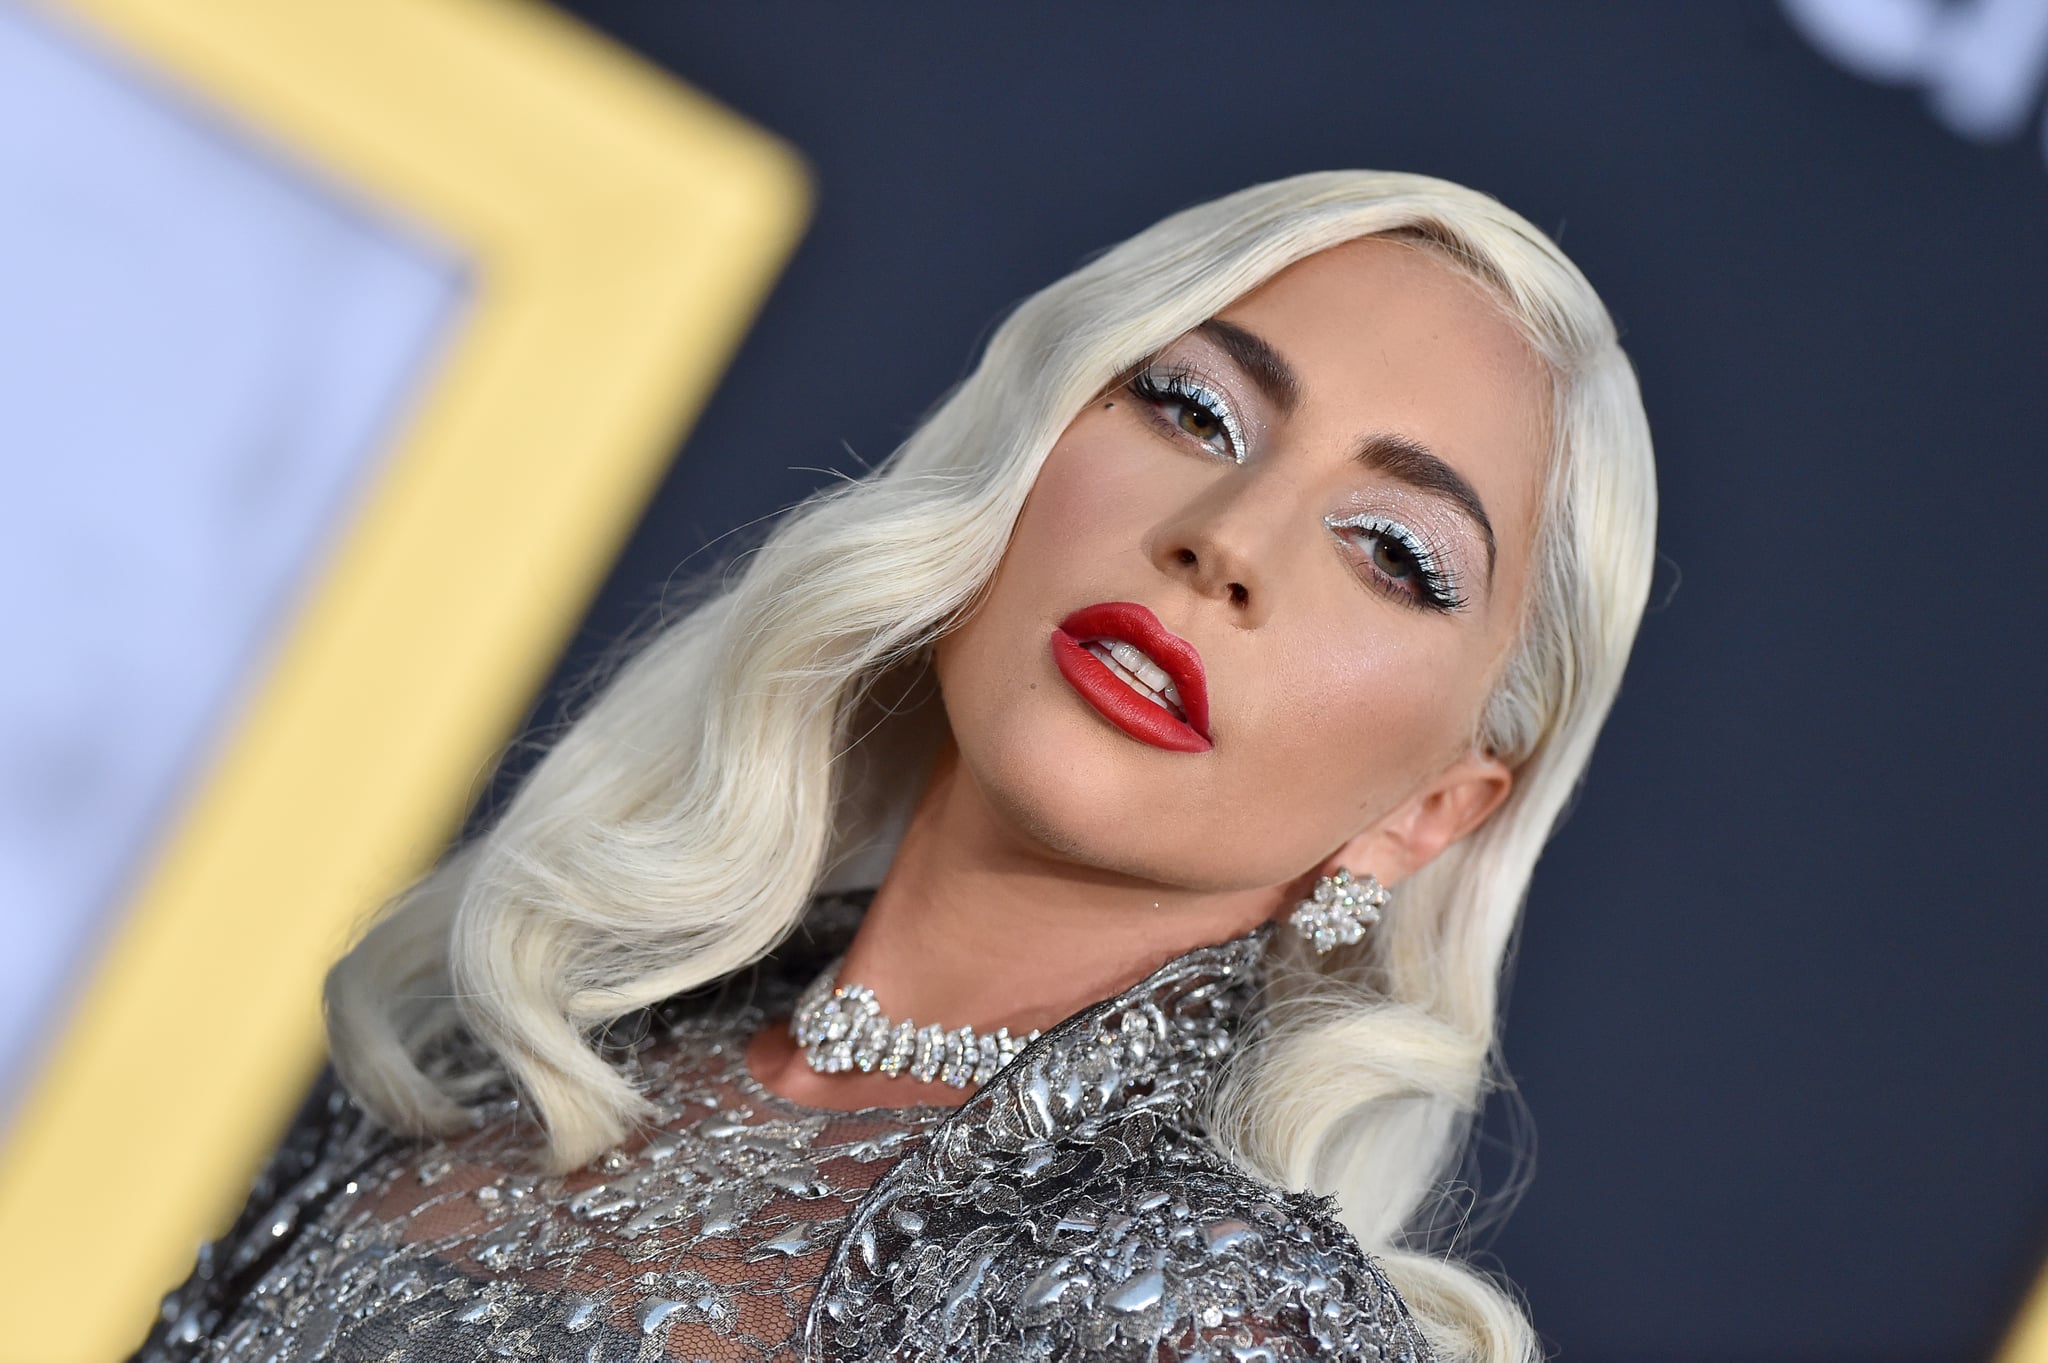 LOS ANGELES, CA - SEPTEMBER 24:  Lady Gaga attends the premiere of Warner Bros. Pictures' 'A Star Is Born' at The Shrine Auditorium on September 24, 2018 in Los Angeles, California.  (Photo by Axelle/Bauer-Griffin/FilmMagic)